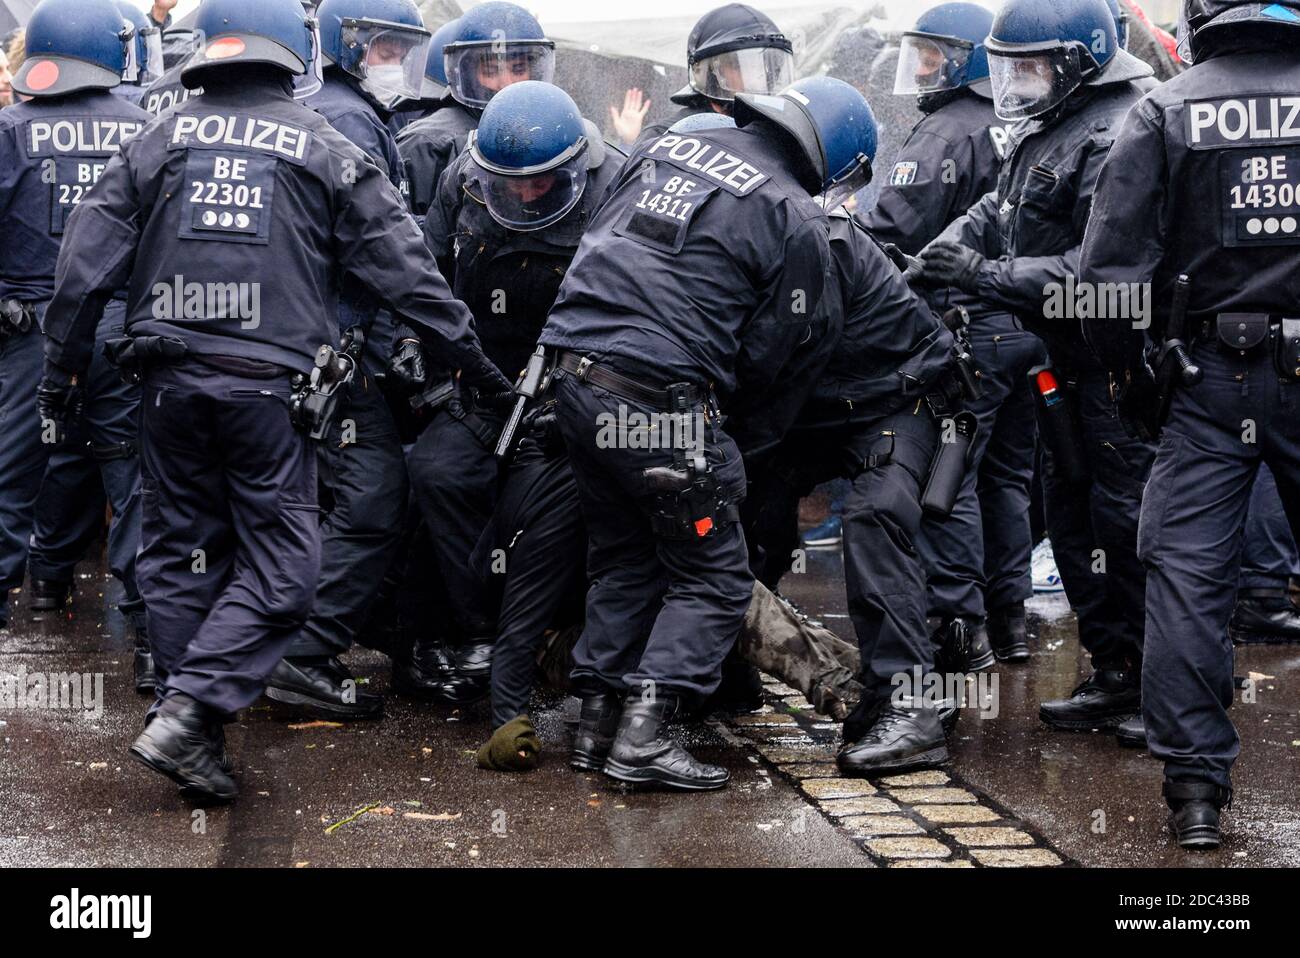 Berlin, Germany. 18th Nov, 2020. Germany, Berlin, November 18, 2020: Police officers try to displace protesters during the use of water cannons in front of Brandenburg Gate after heterogeneous groups around Corona deniers, conspiracy theorists and right-wing extremists called for blocking access to German Government Buildings. Both the Bundestag and the Bundesrat vote on planned new regulations of the infection protection law on November 18, 2020. (Photo by Jan Scheunert/Sipa USA) Credit: Sipa USA/Alamy Live News Stock Photo